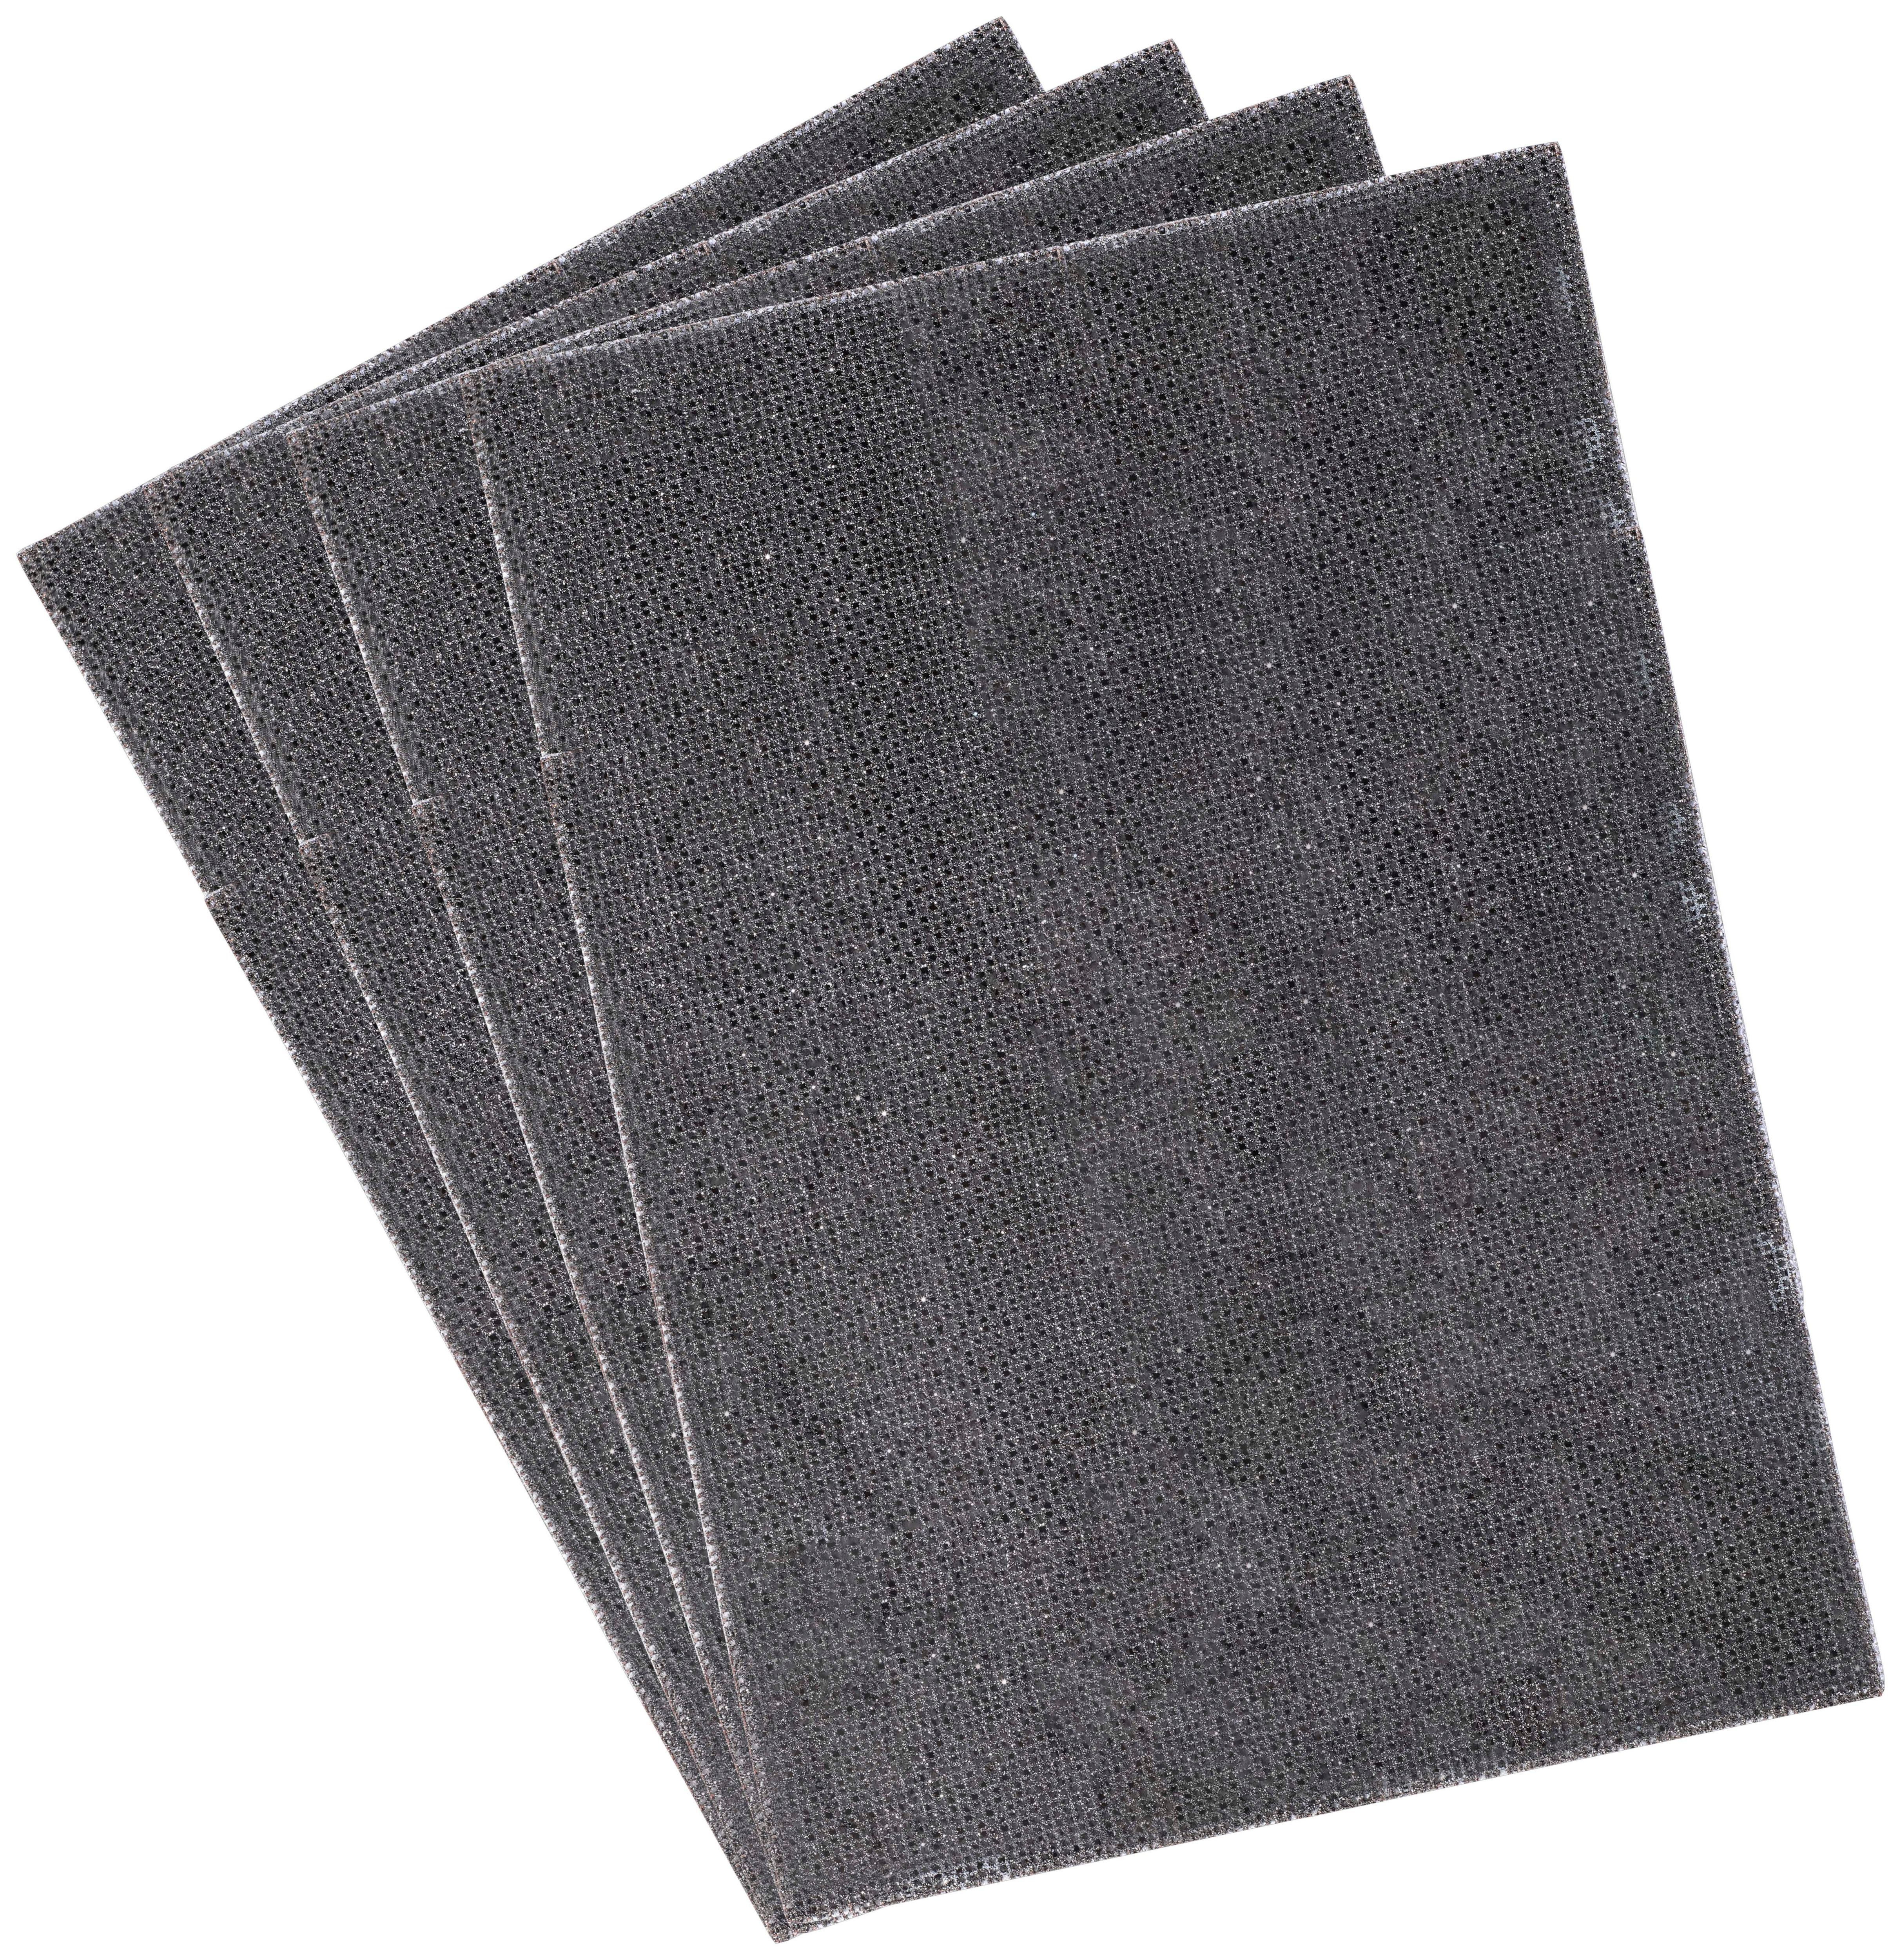 Image of Einhell kwb A4 Assorted Grit Sanding Mesh Sheet - Pack of 4